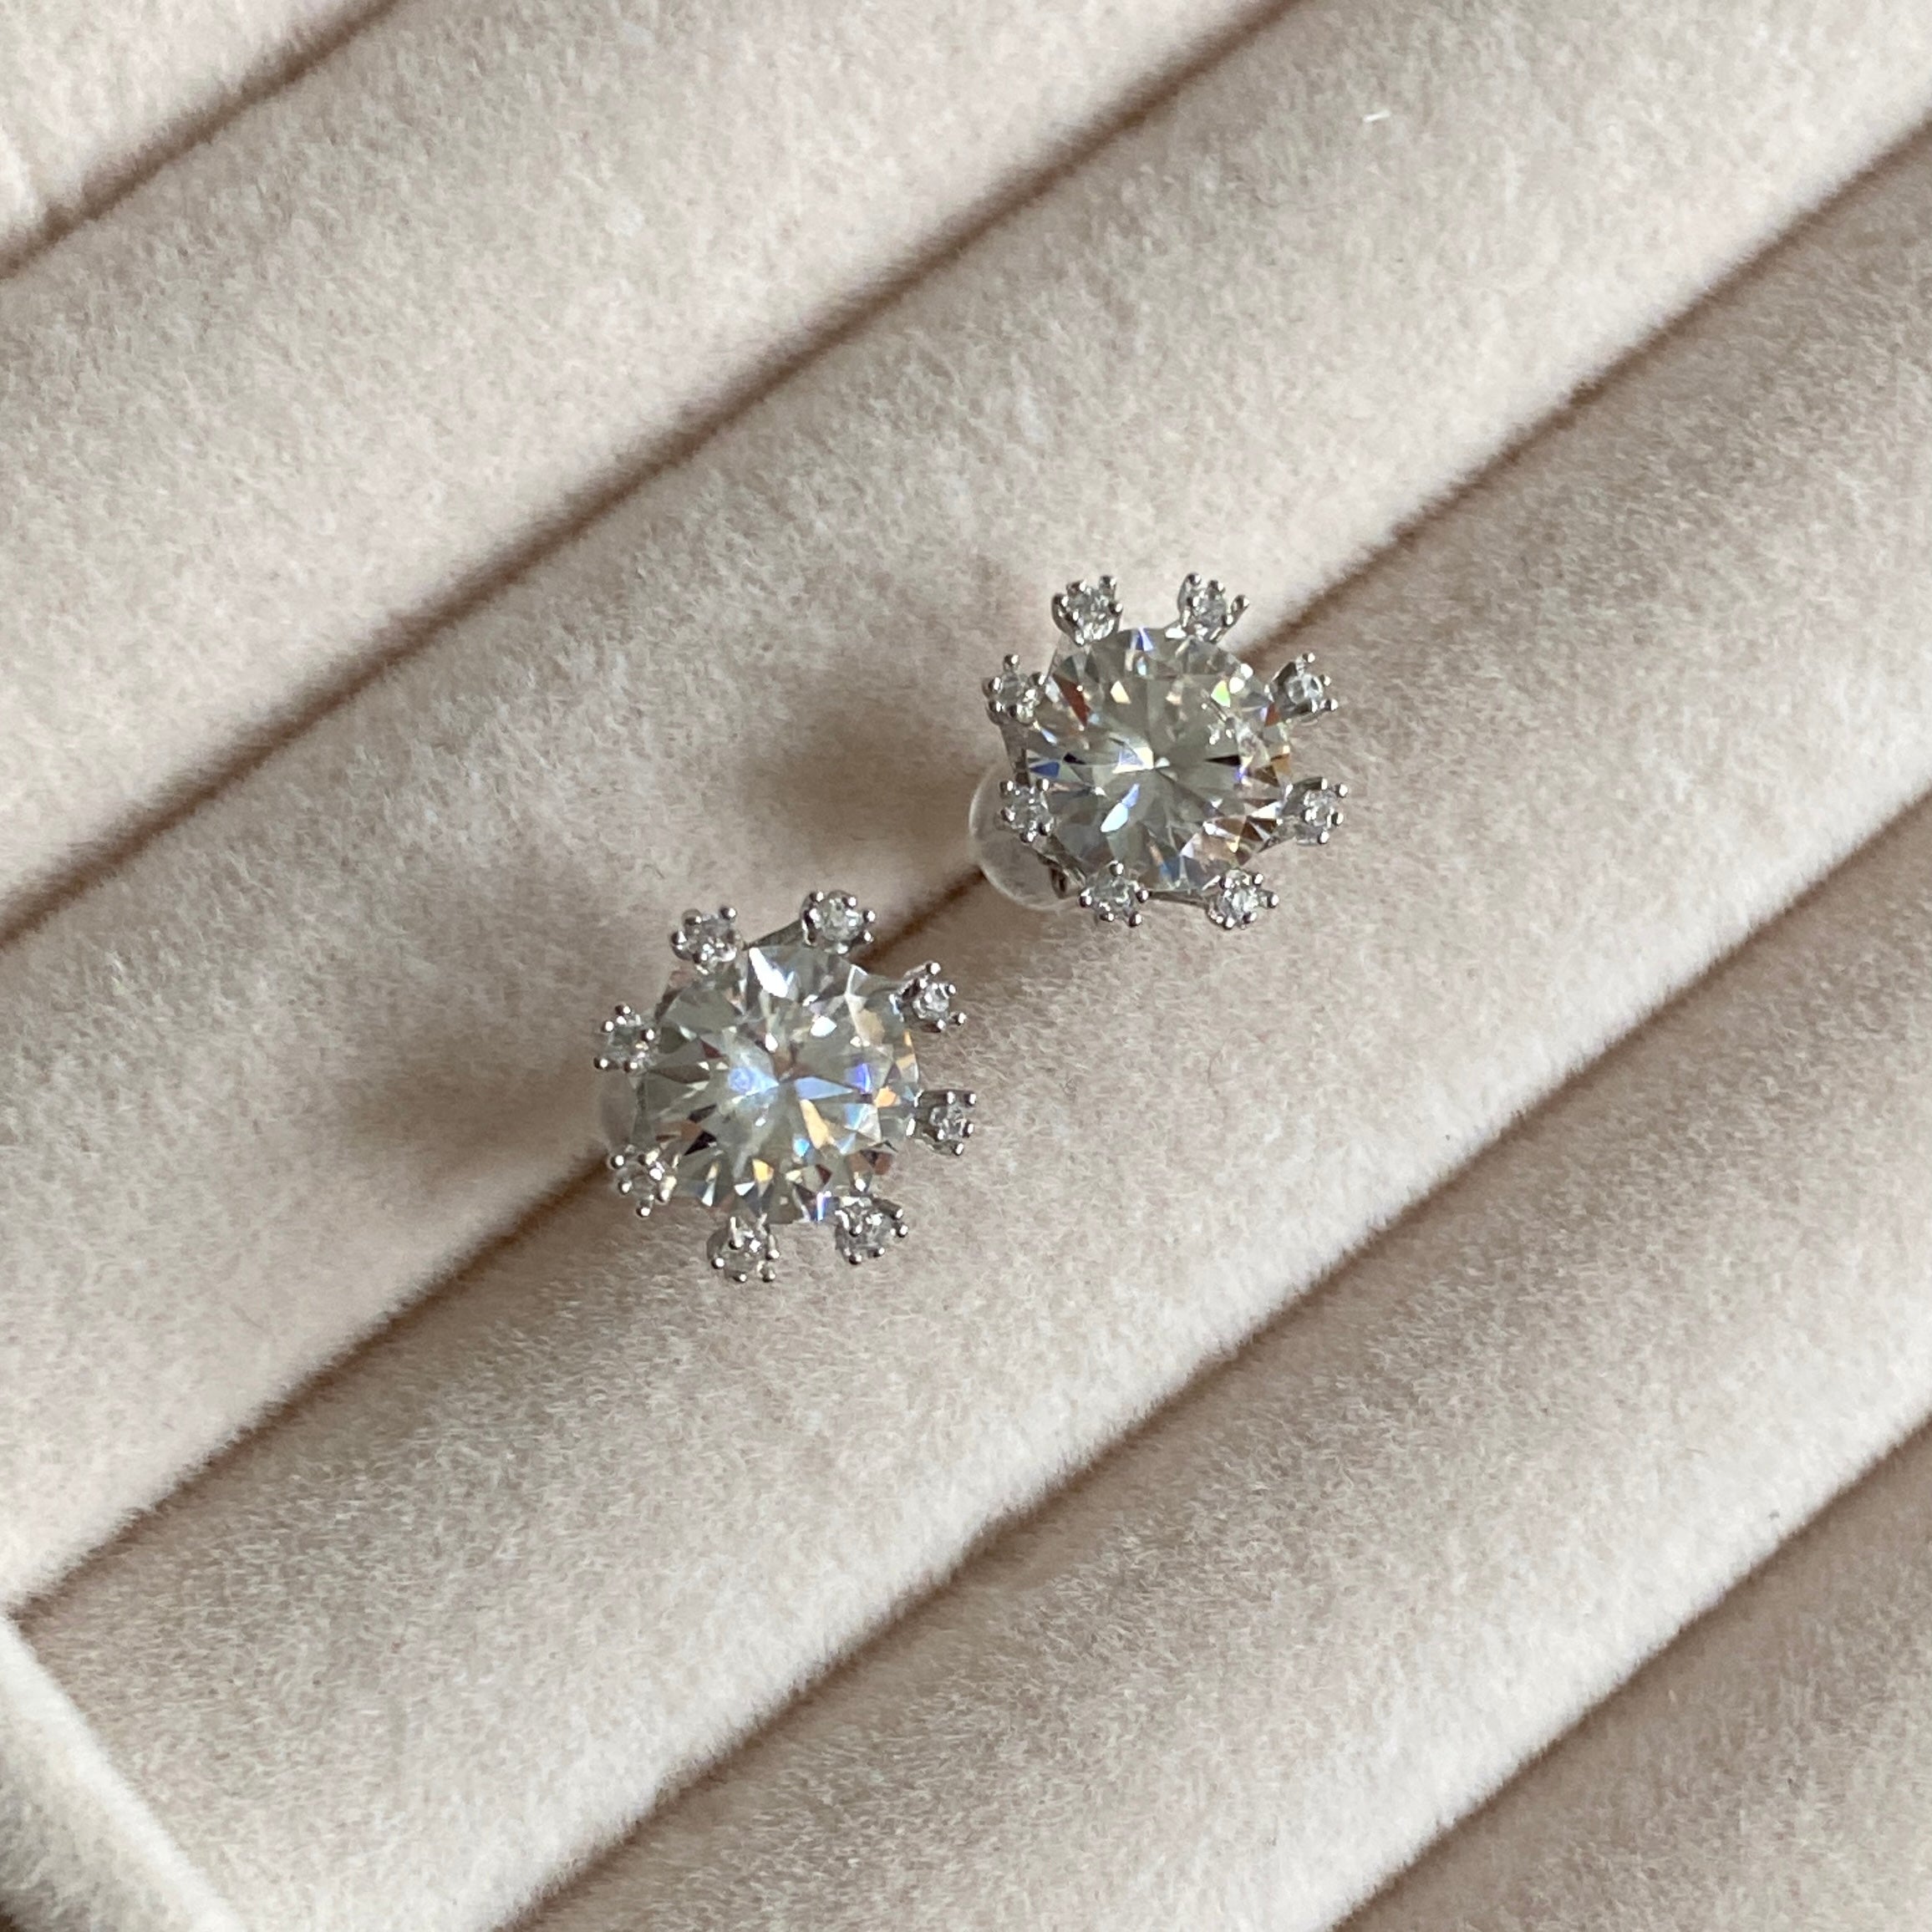 The Linear Crystal Stud earrings will add a touch of sparkle to any wardrobe. Crafted with high-quality 925 sterling silver, they have cz crystals embedded for a beautiful, eye-catching look. These 1ct earrings are perfect for any occasion day or night.  Details: 1x1 cm